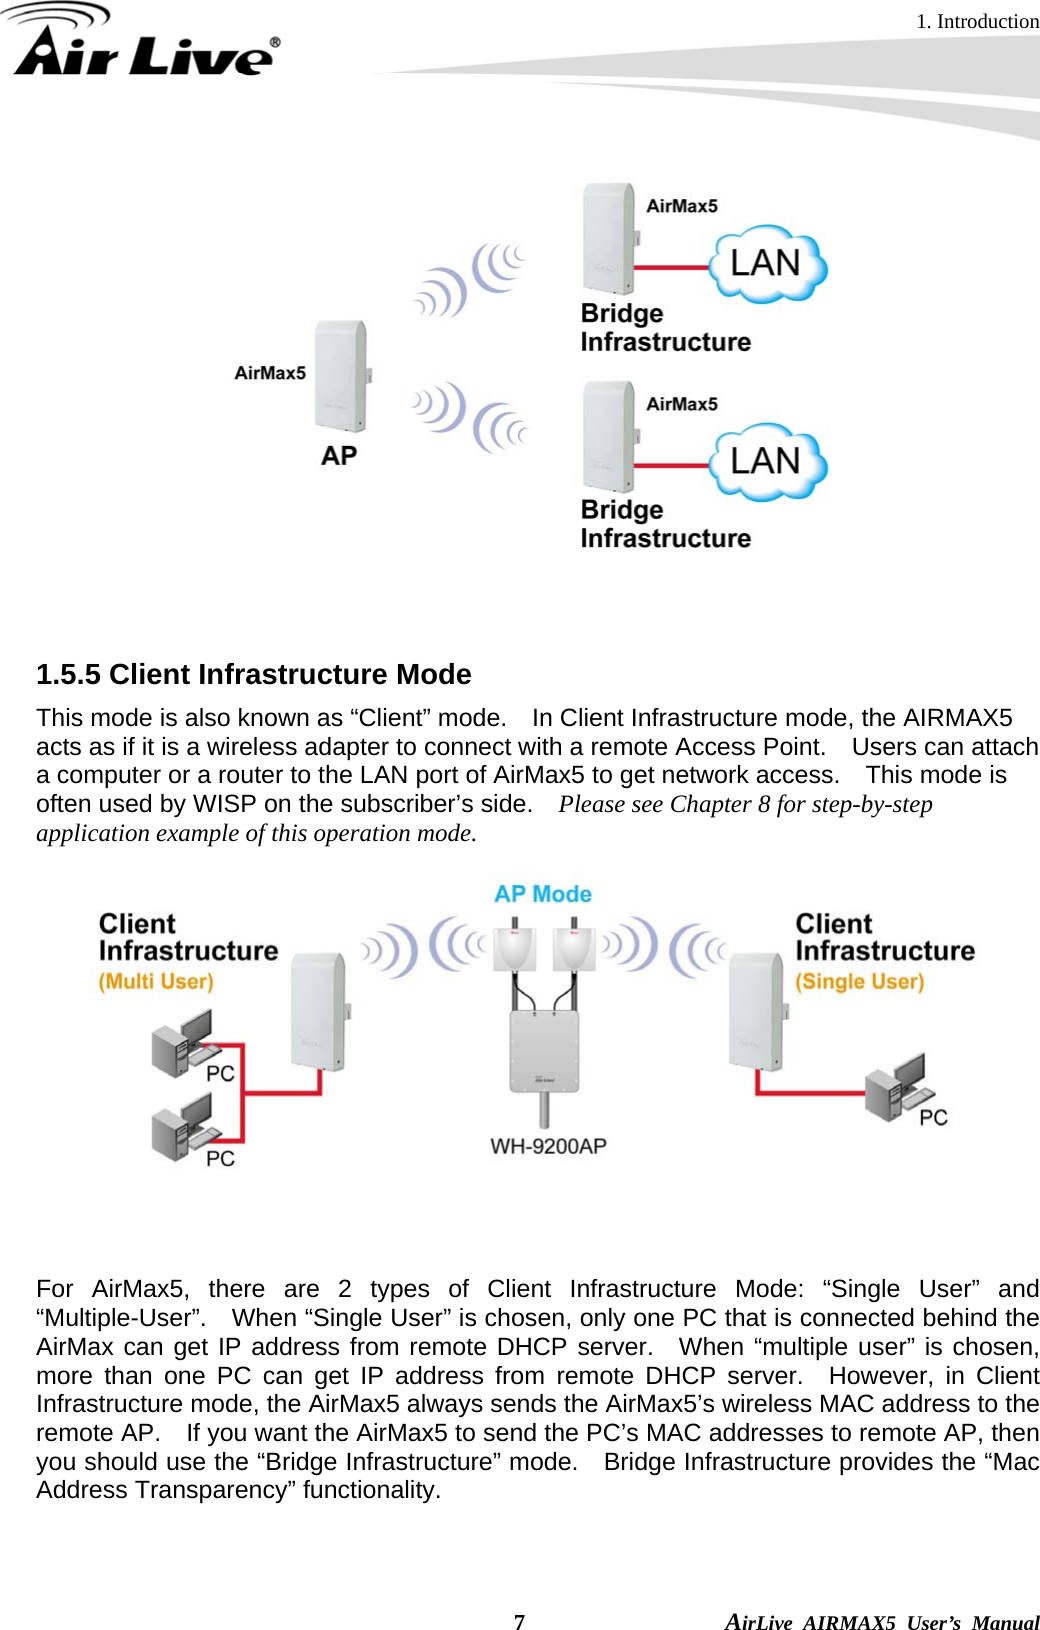 1. Introduction  7                AirLive AIRMAX5 User’s Manual    1.5.5 Client Infrastructure Mode This mode is also known as “Client” mode.    In Client Infrastructure mode, the AIRMAX5 acts as if it is a wireless adapter to connect with a remote Access Point.    Users can attach a computer or a router to the LAN port of AirMax5 to get network access.    This mode is often used by WISP on the subscriber’s side.    Please see Chapter 8 for step-by-step application example of this operation mode.    For AirMax5, there are 2 types of Client Infrastructure Mode: “Single User” and “Multiple-User”.    When “Single User” is chosen, only one PC that is connected behind the AirMax can get IP address from remote DHCP server.  When “multiple user” is chosen, more than one PC can get IP address from remote DHCP server.  However, in Client Infrastructure mode, the AirMax5 always sends the AirMax5’s wireless MAC address to the remote AP.    If you want the AirMax5 to send the PC’s MAC addresses to remote AP, then you should use the “Bridge Infrastructure” mode.    Bridge Infrastructure provides the “Mac Address Transparency” functionality. 